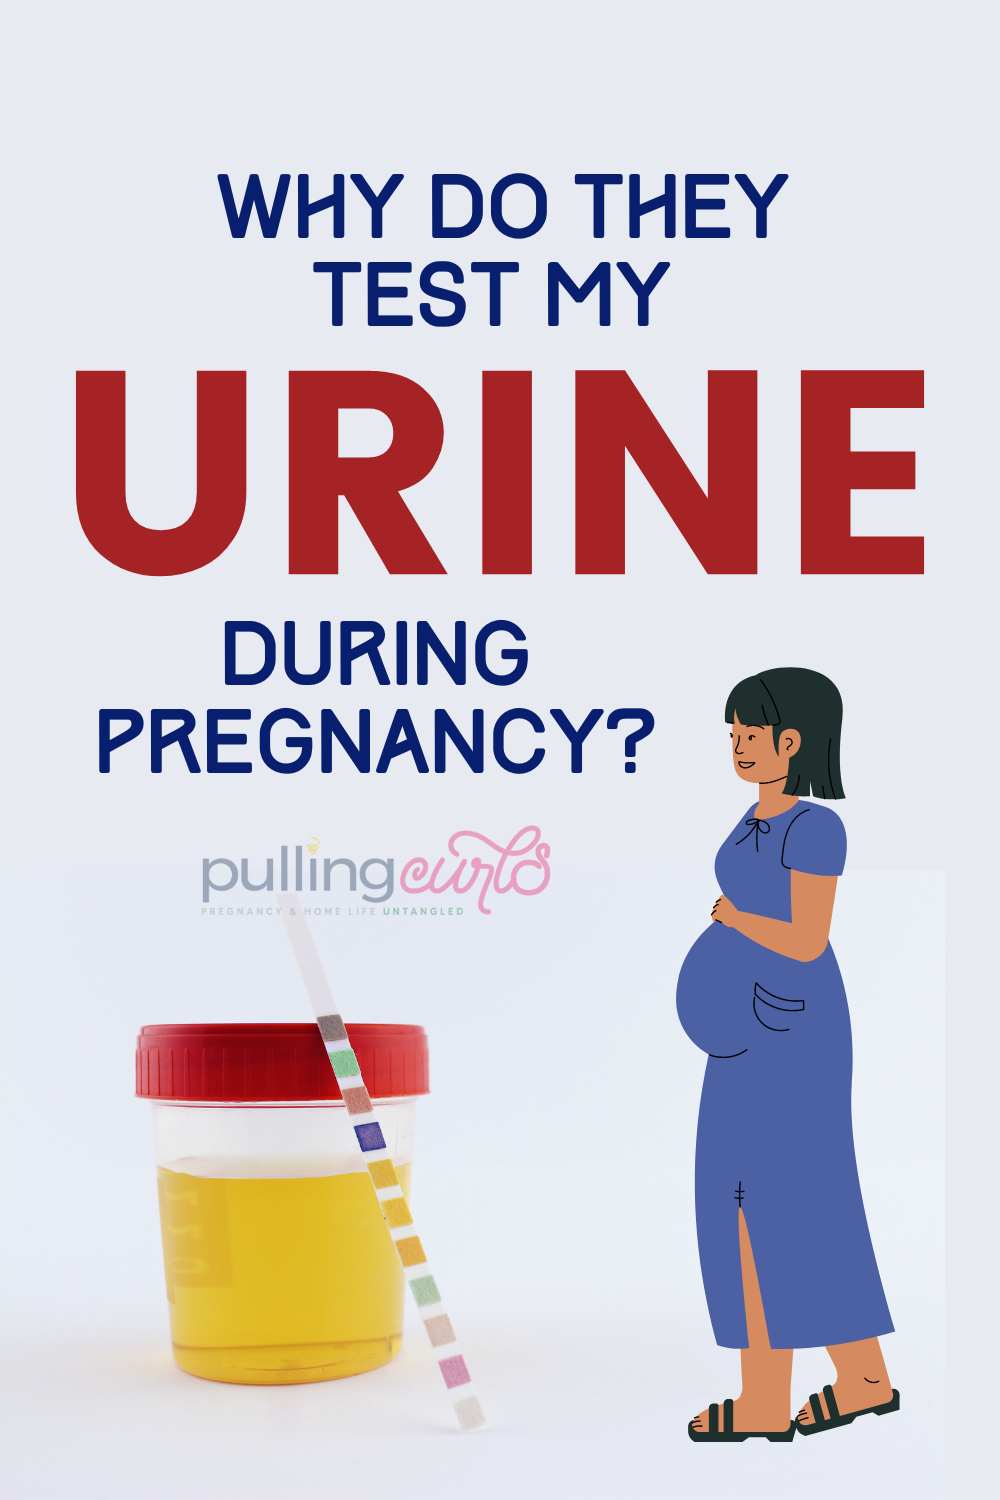 Having protein in your urine while as a pregnant woman isn't too unusual, but when the results start to be +1 or +2 your doctor will start to become more concerned, as you enter the third trimester. Let this L&D RN tell you exactly why this happens, why they test your urine sample and why it's a problem. via @pullingcurls